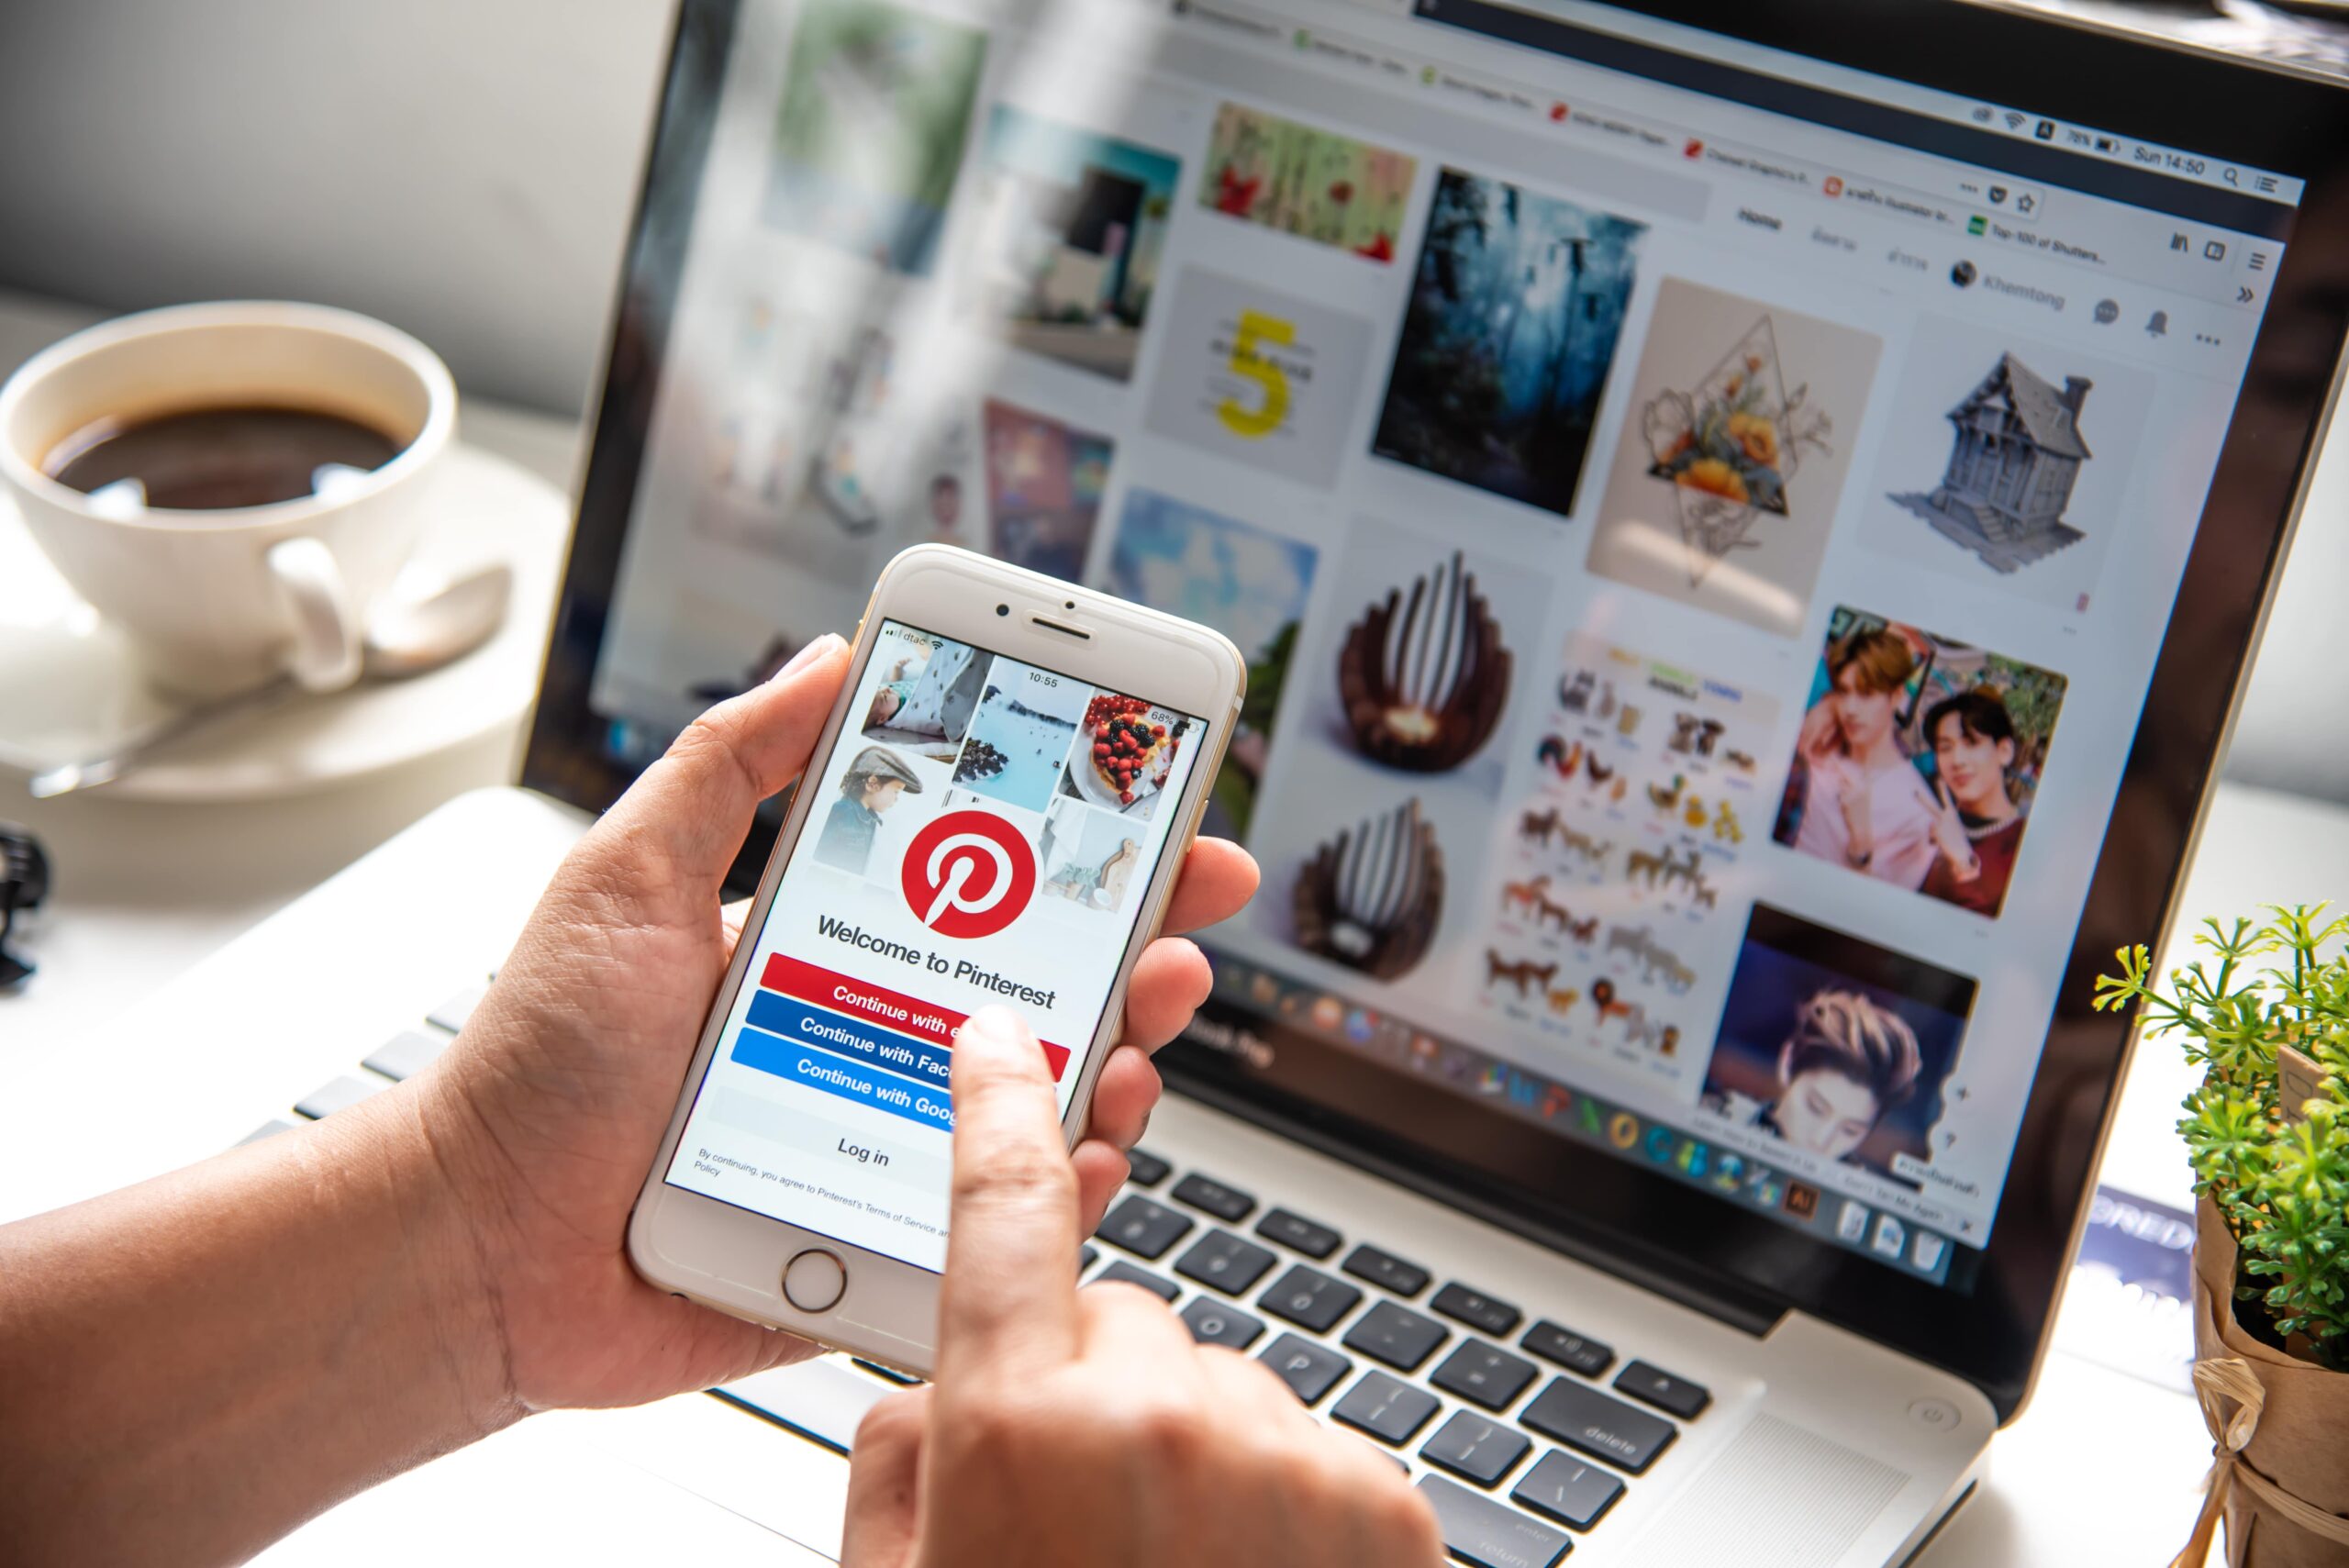 How to add photos videos in Pinterest